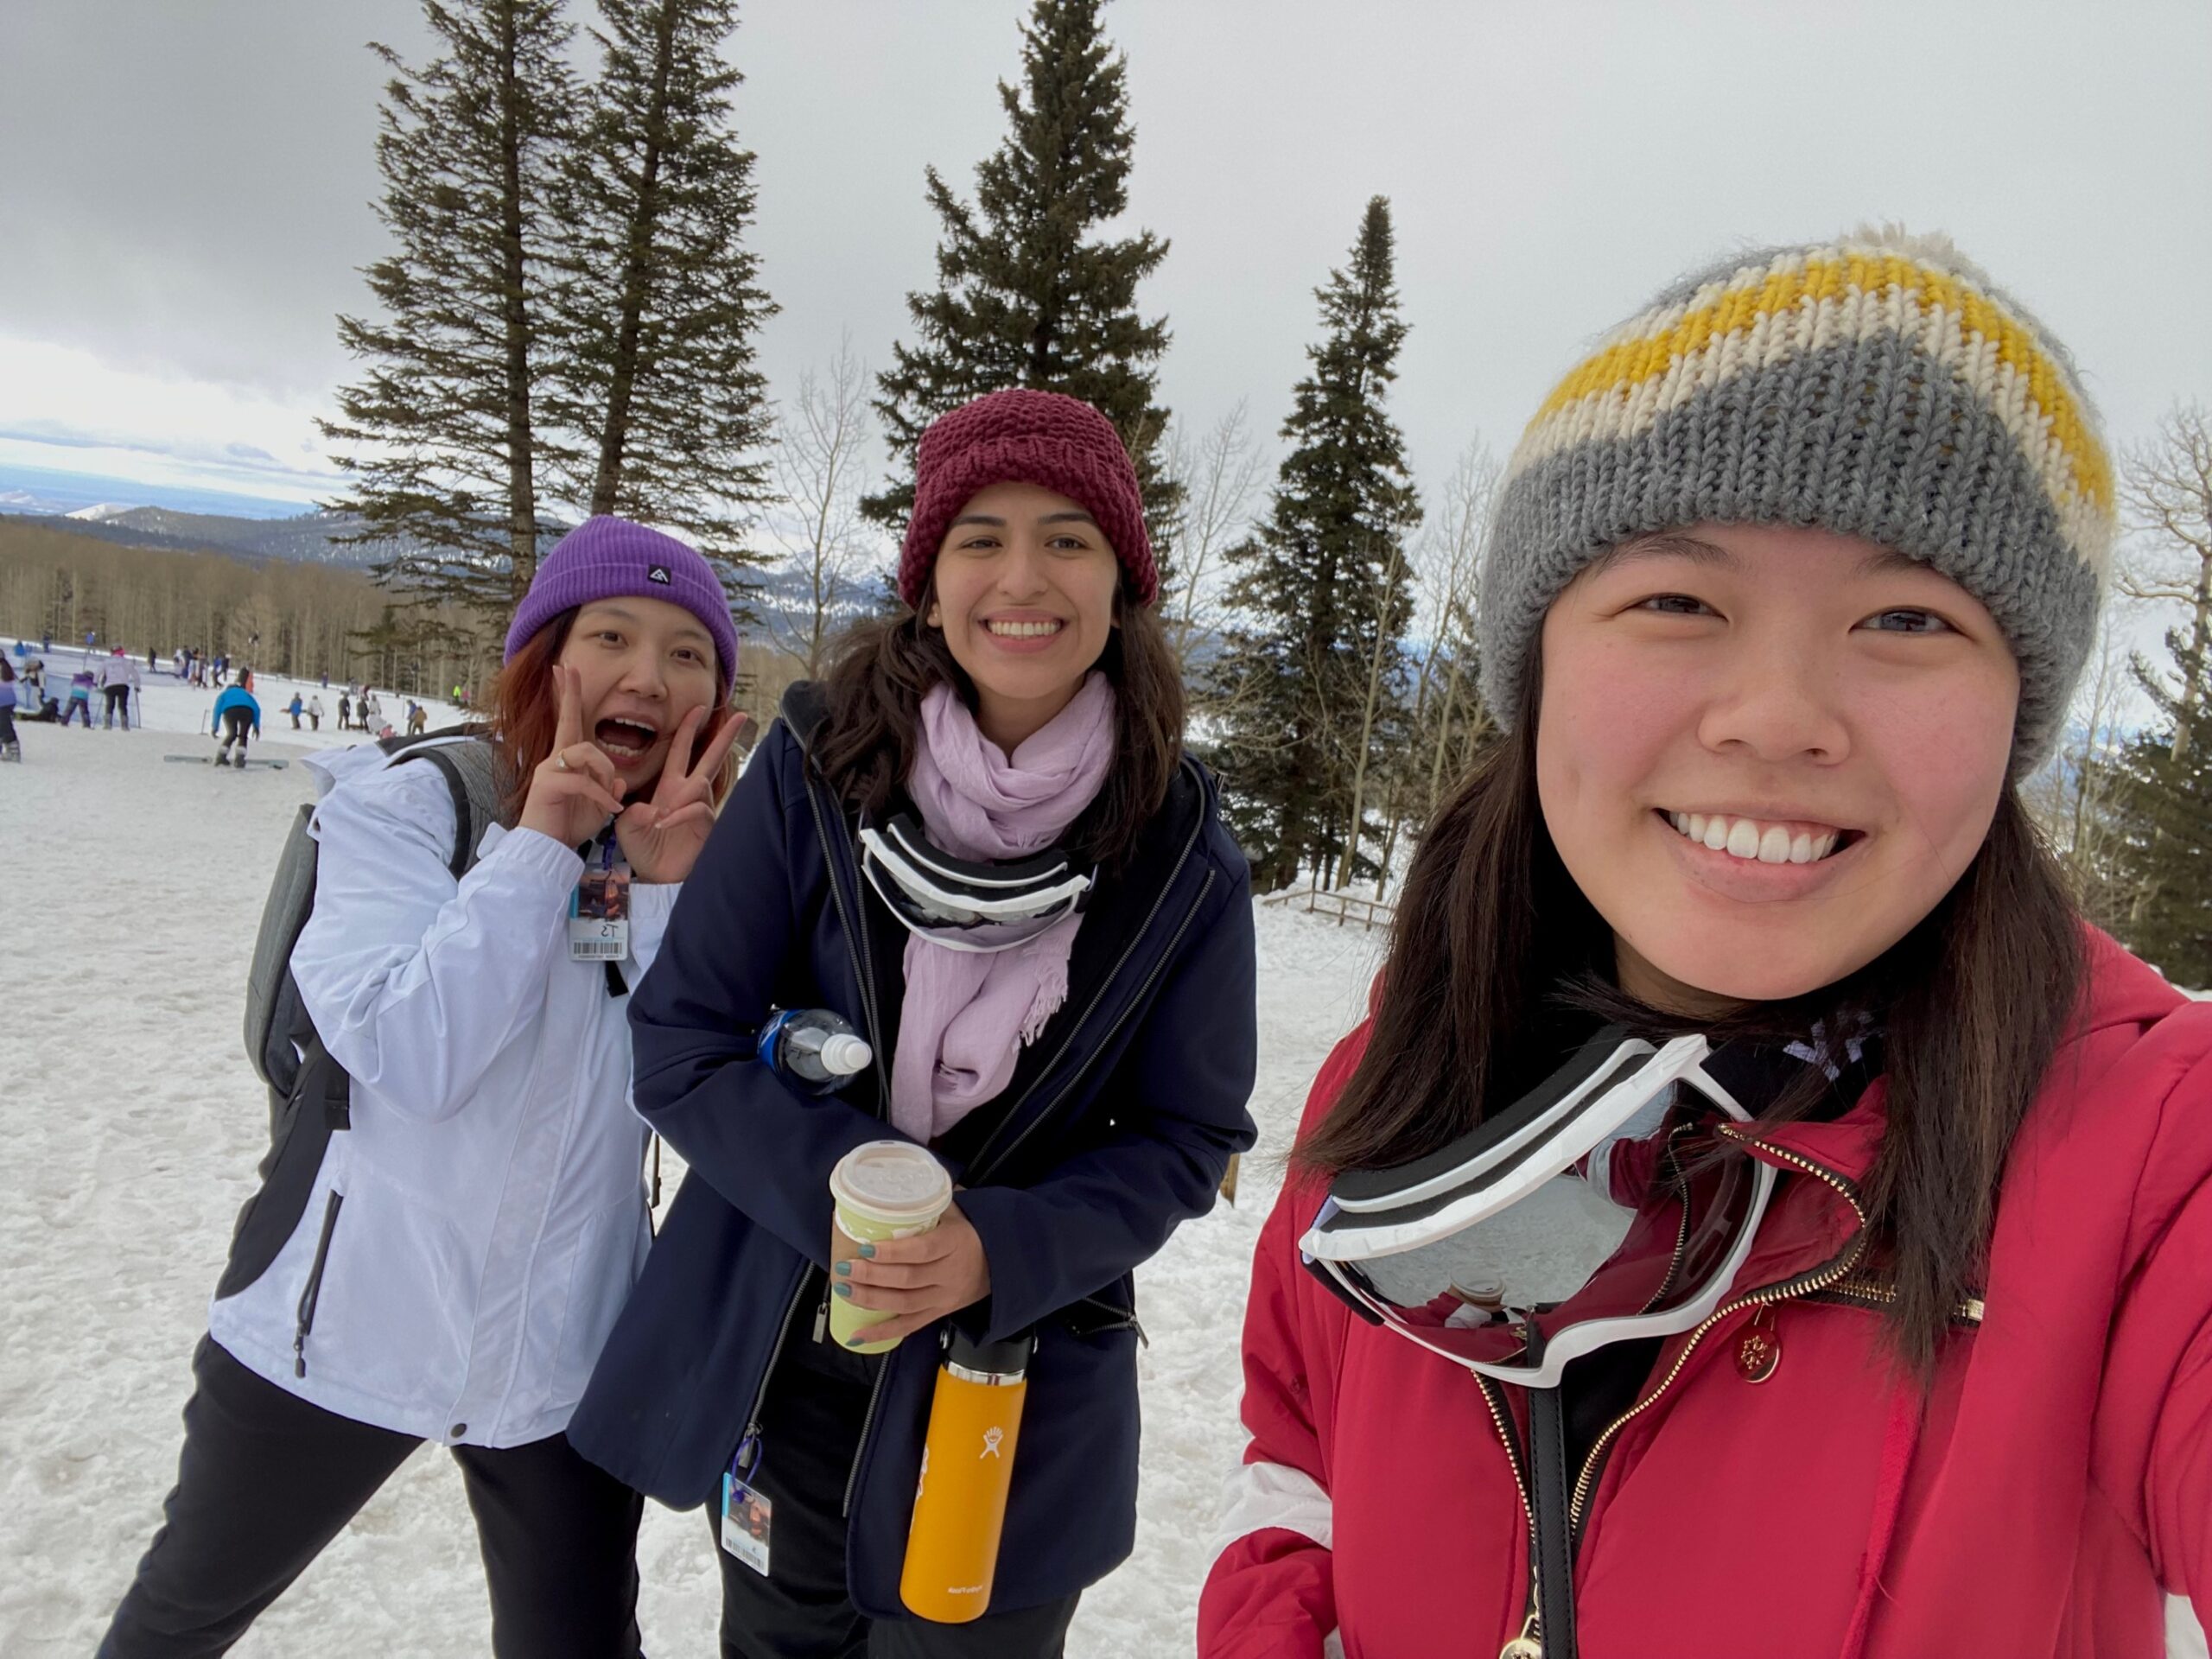 Three people taking a selfie in front of a snowy landscape.